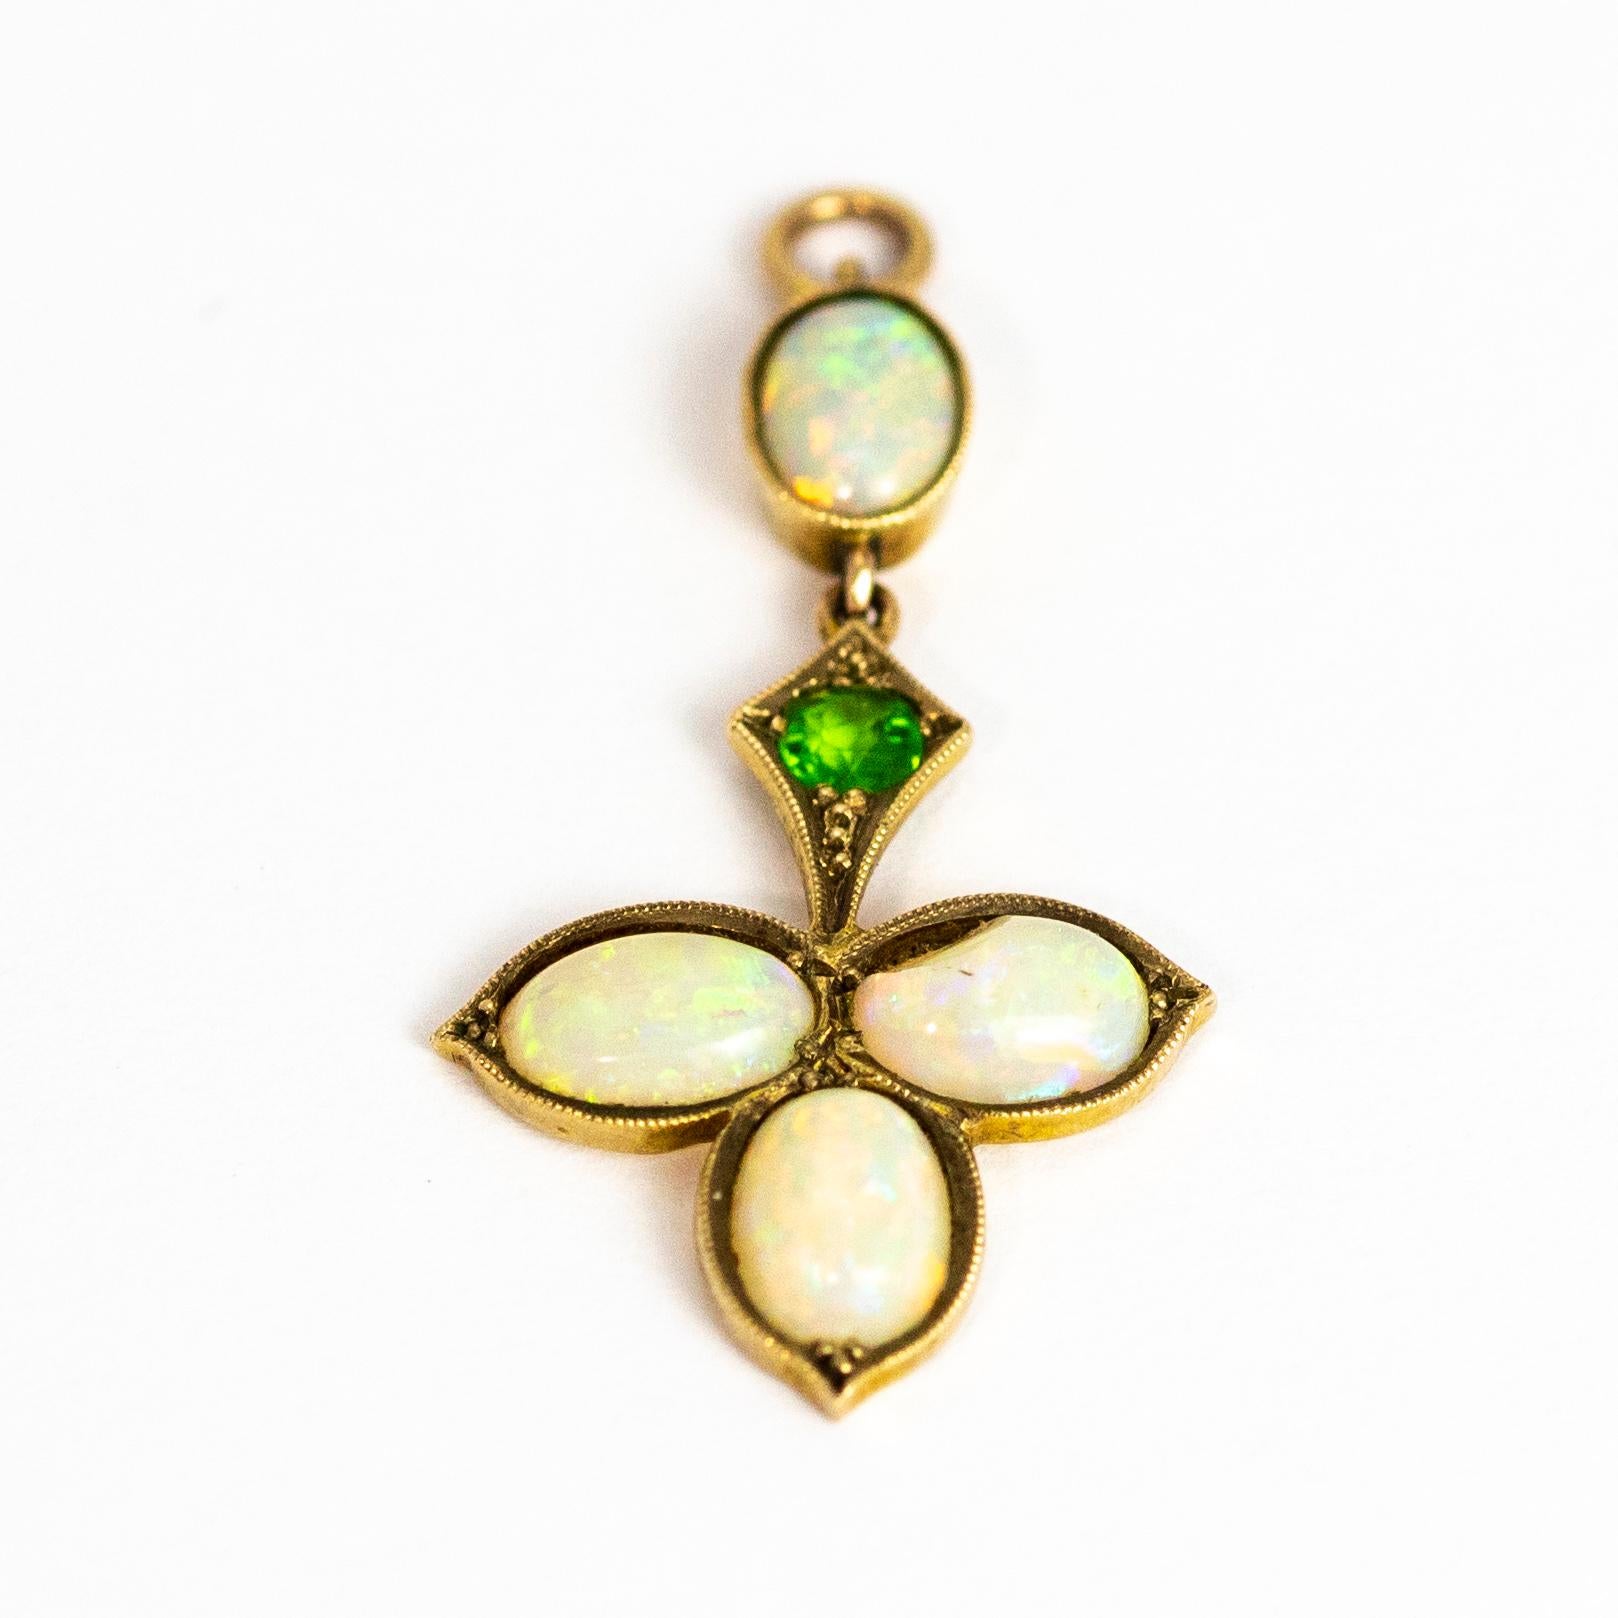 This fabulous pendant holds a total of four opals which shimmer all different colours. Set in a three leaf style pendant and also holds a green garnet in a kite shaped setting. Modelled in yellow Gold.

Drop: 35mm
Width: 17mm
*please note, there is